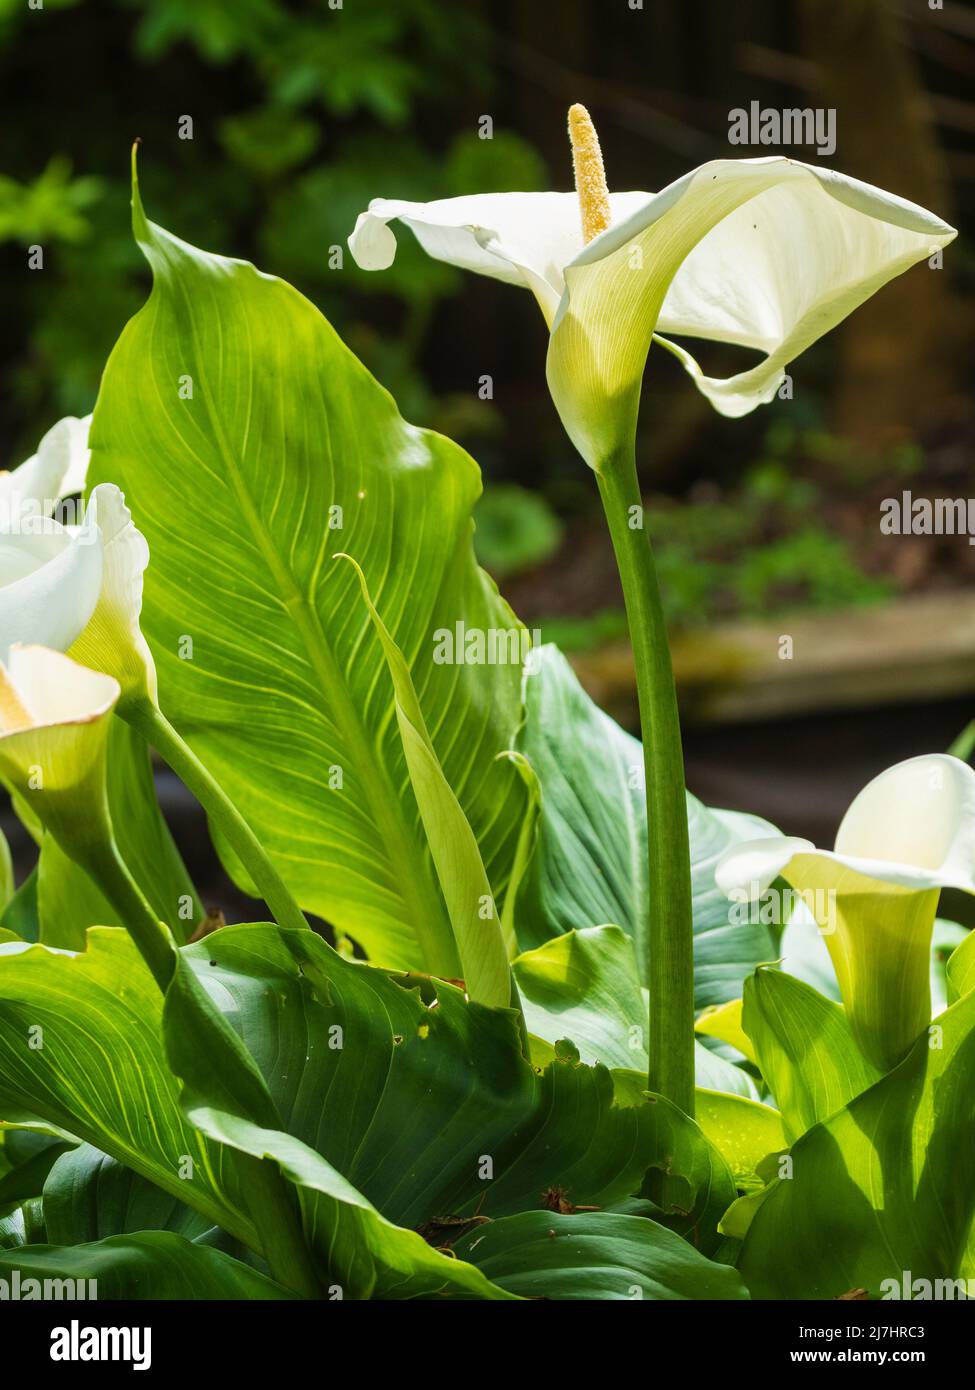 White spathed flower of the hardiest calla lily, Zantedeschia aethiopica 'Crowborough' stands above the large leaved foliage Stock Photo